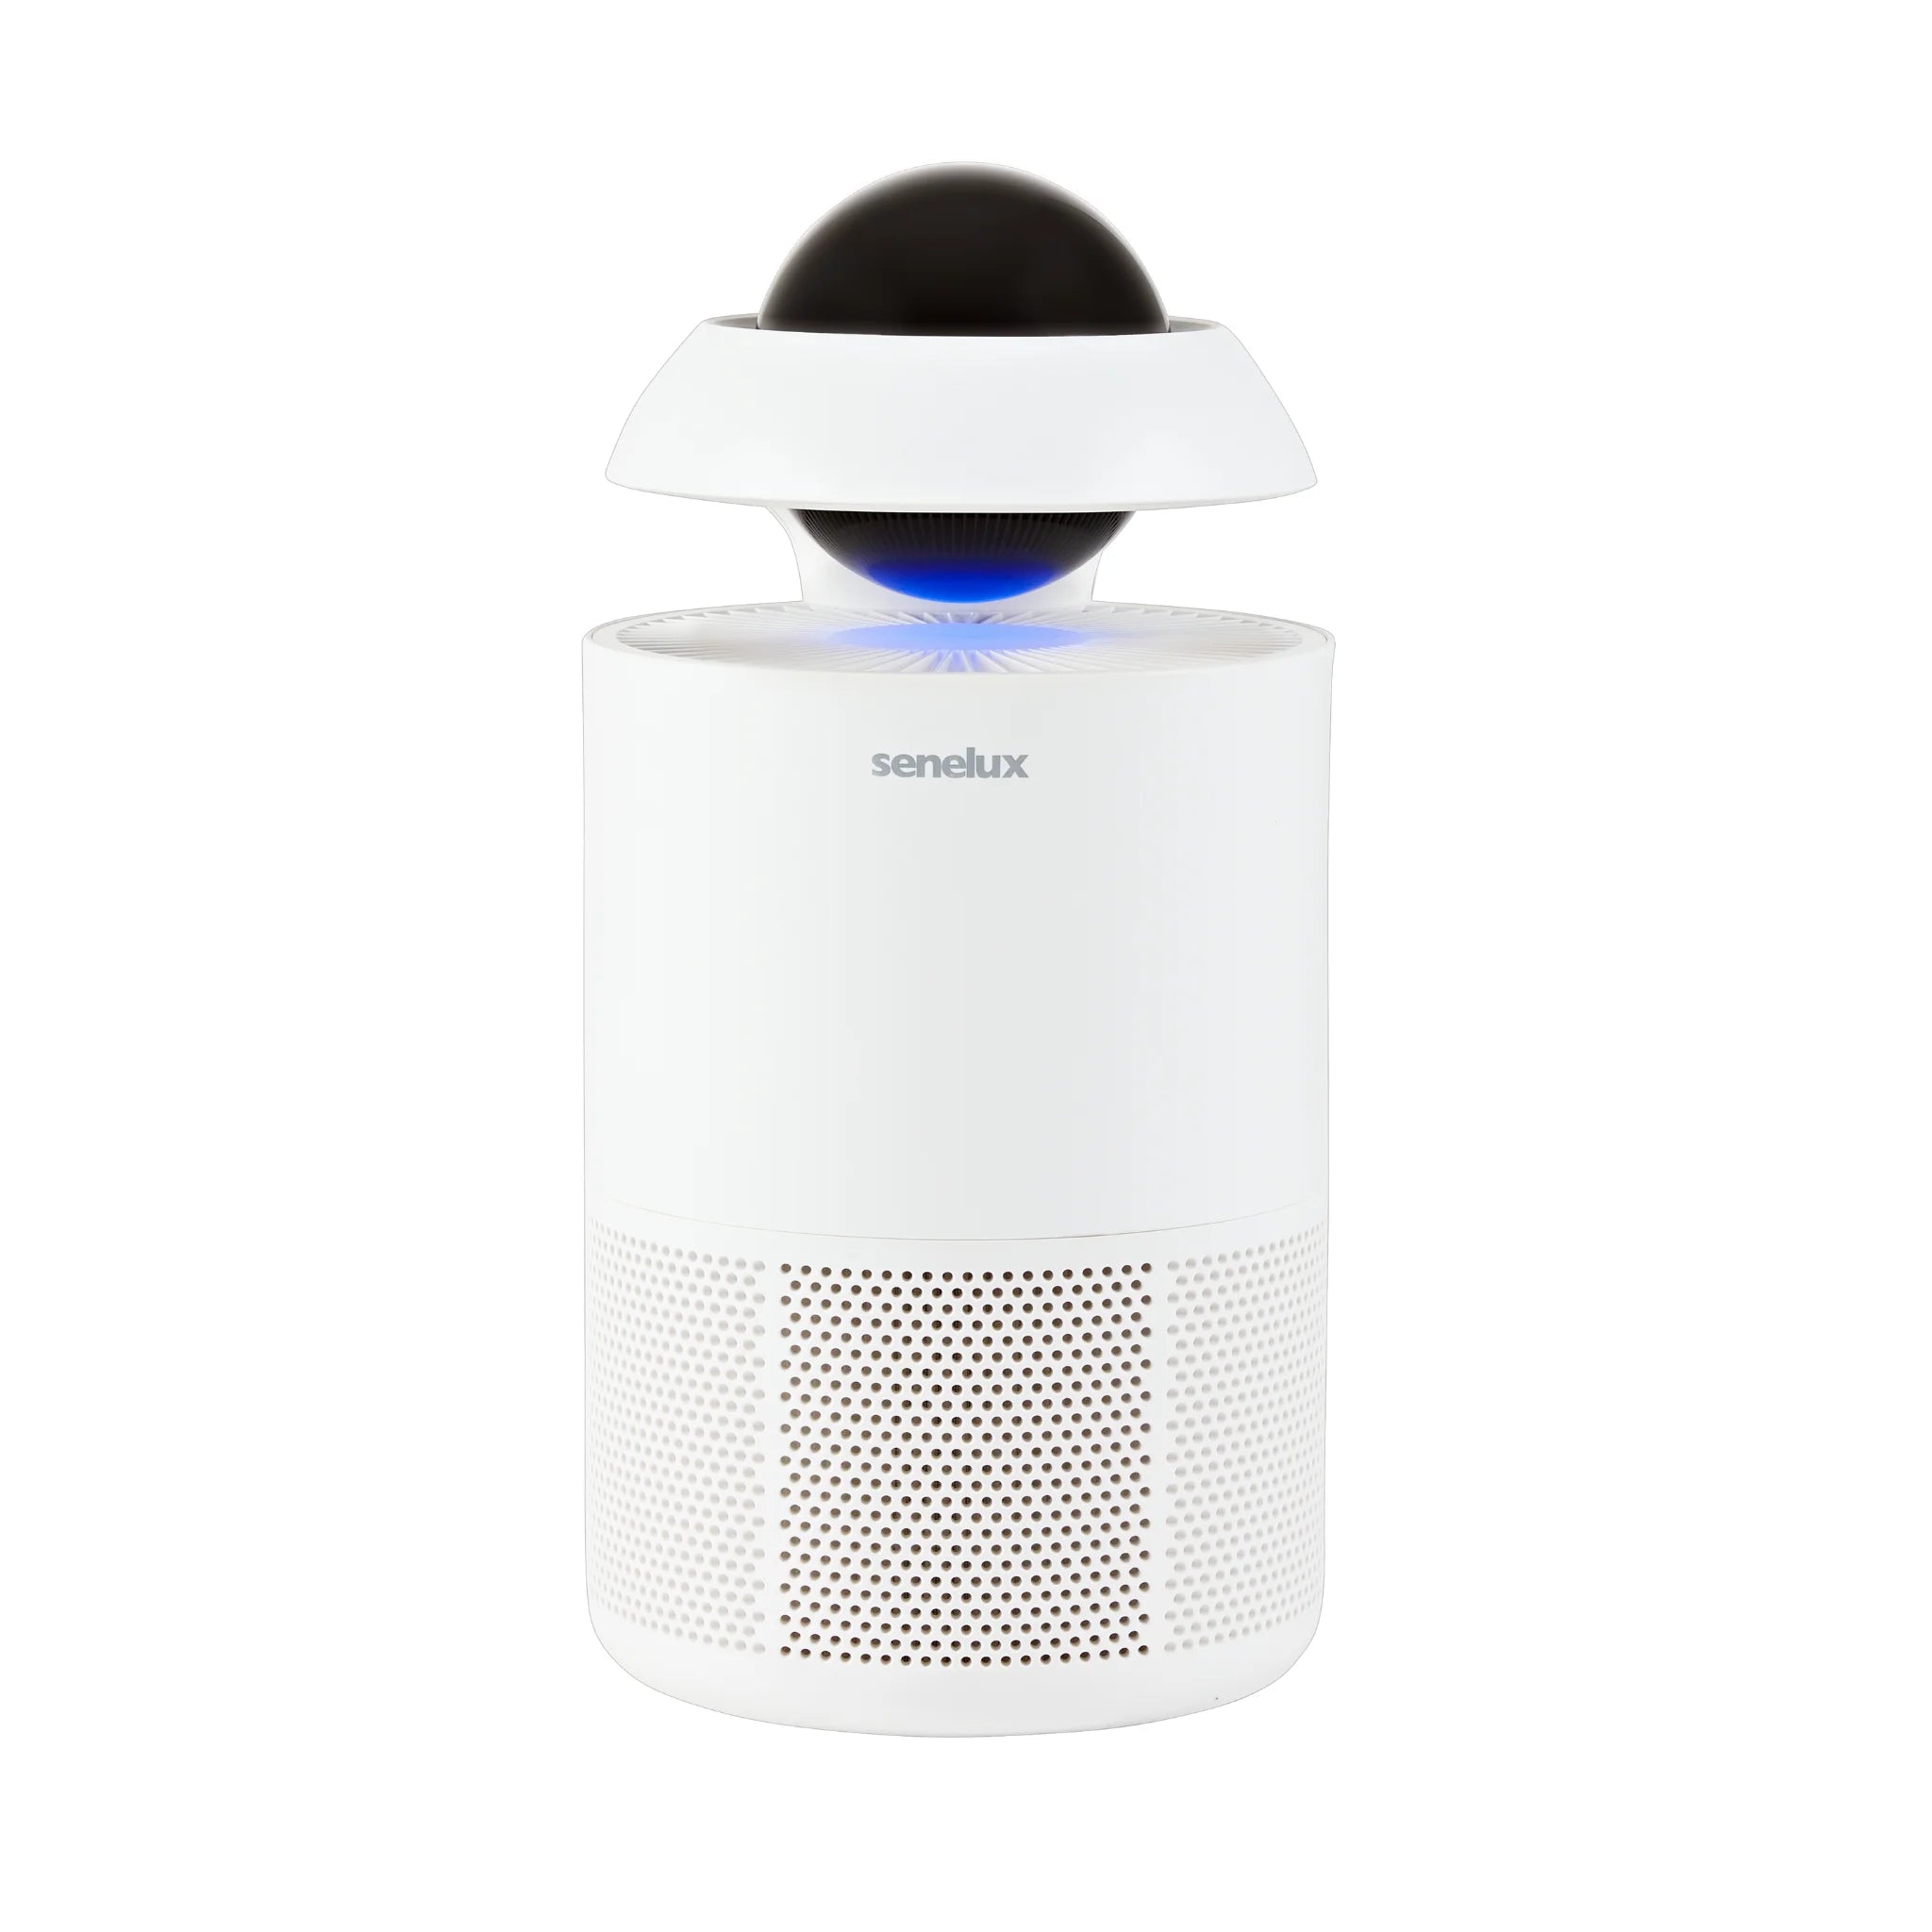 A Senelux Jupiter Air Purifier that is turned on with its inbuilt LED lighting shining from the black control unit.